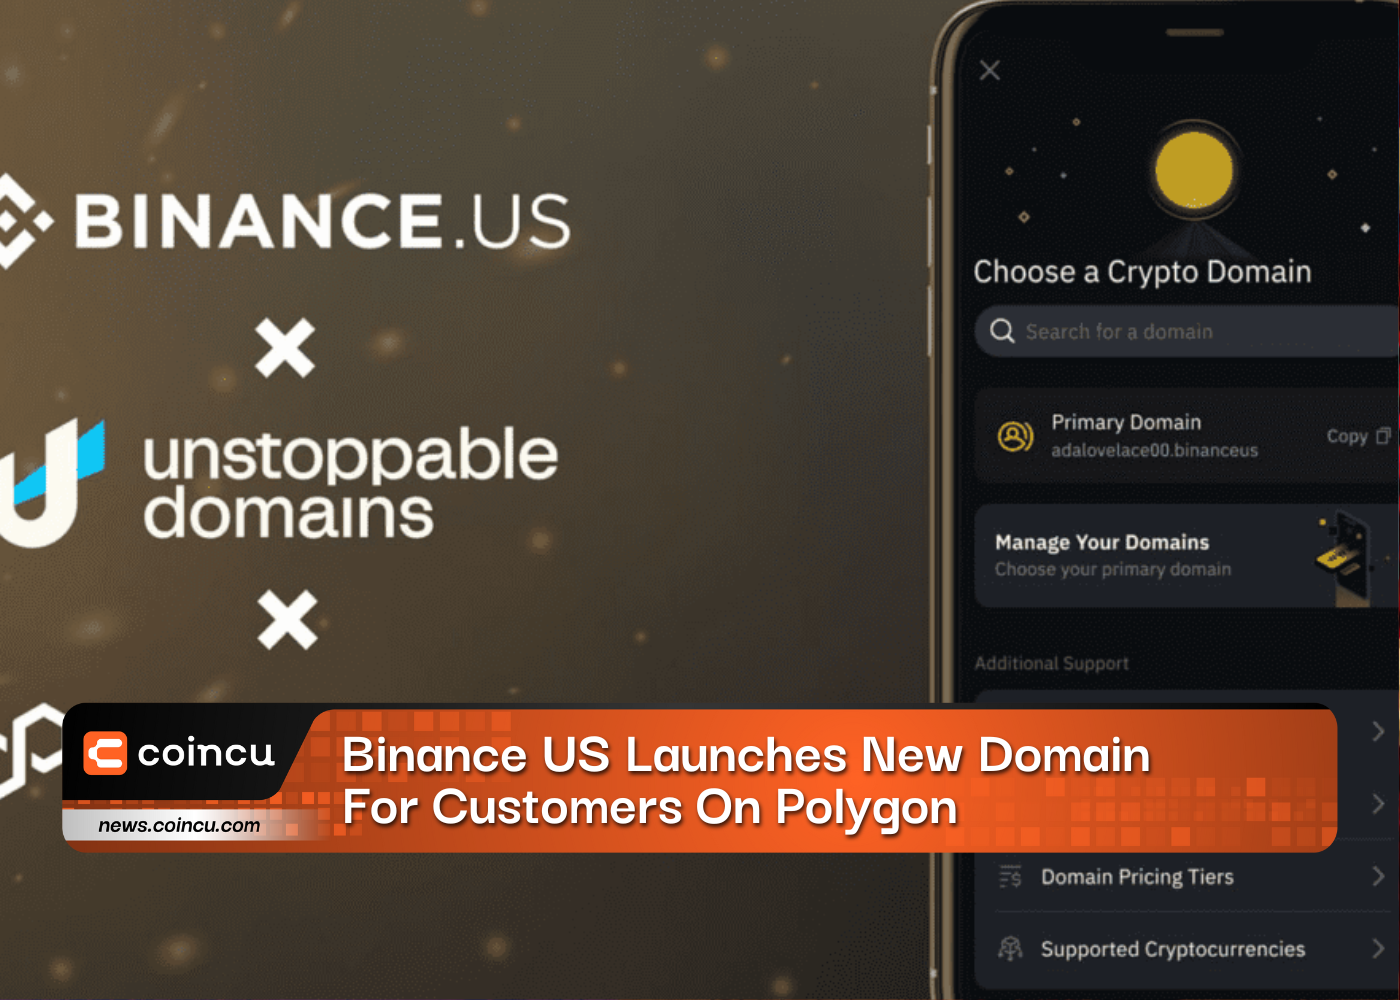 Binance US Launches New Domain For Customers On Polygon